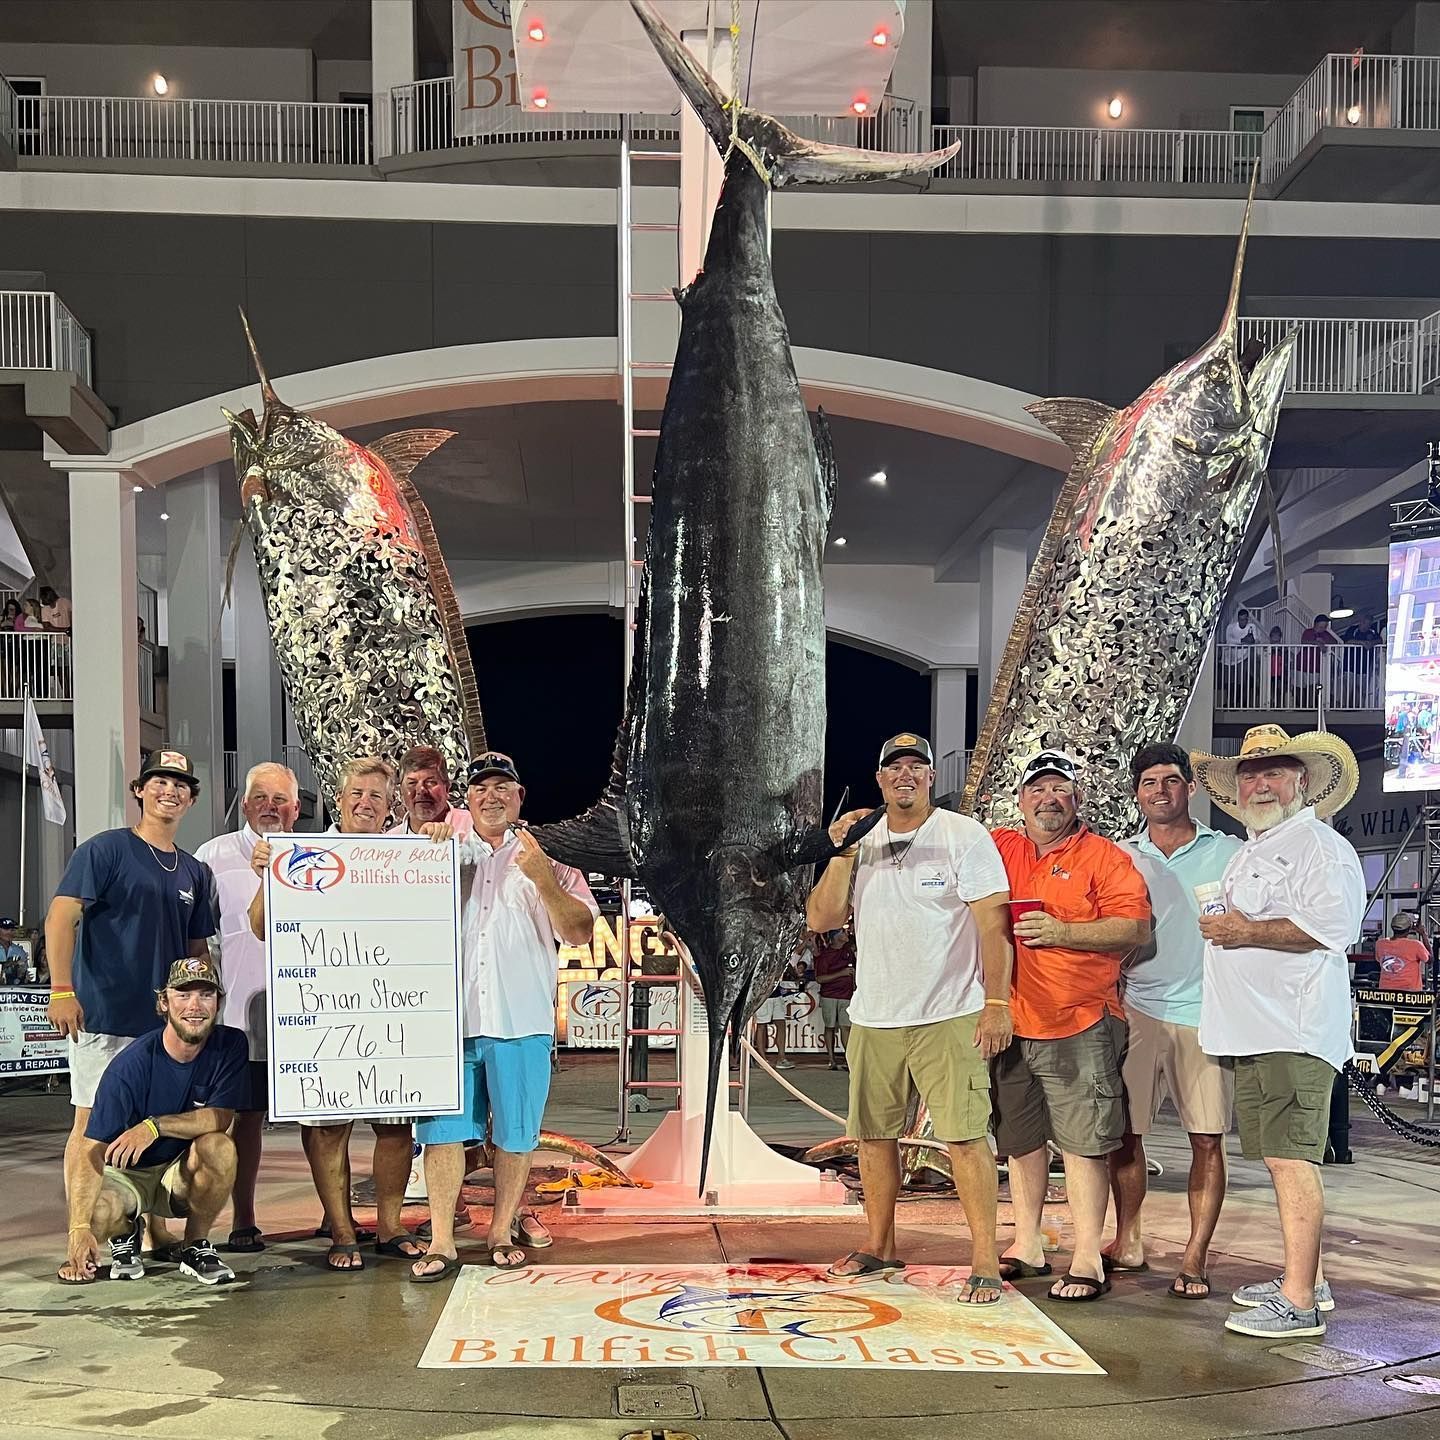 The Mollie out of Destin won the Orange Beach Billfish Classic with a 776-pound blue marlin.